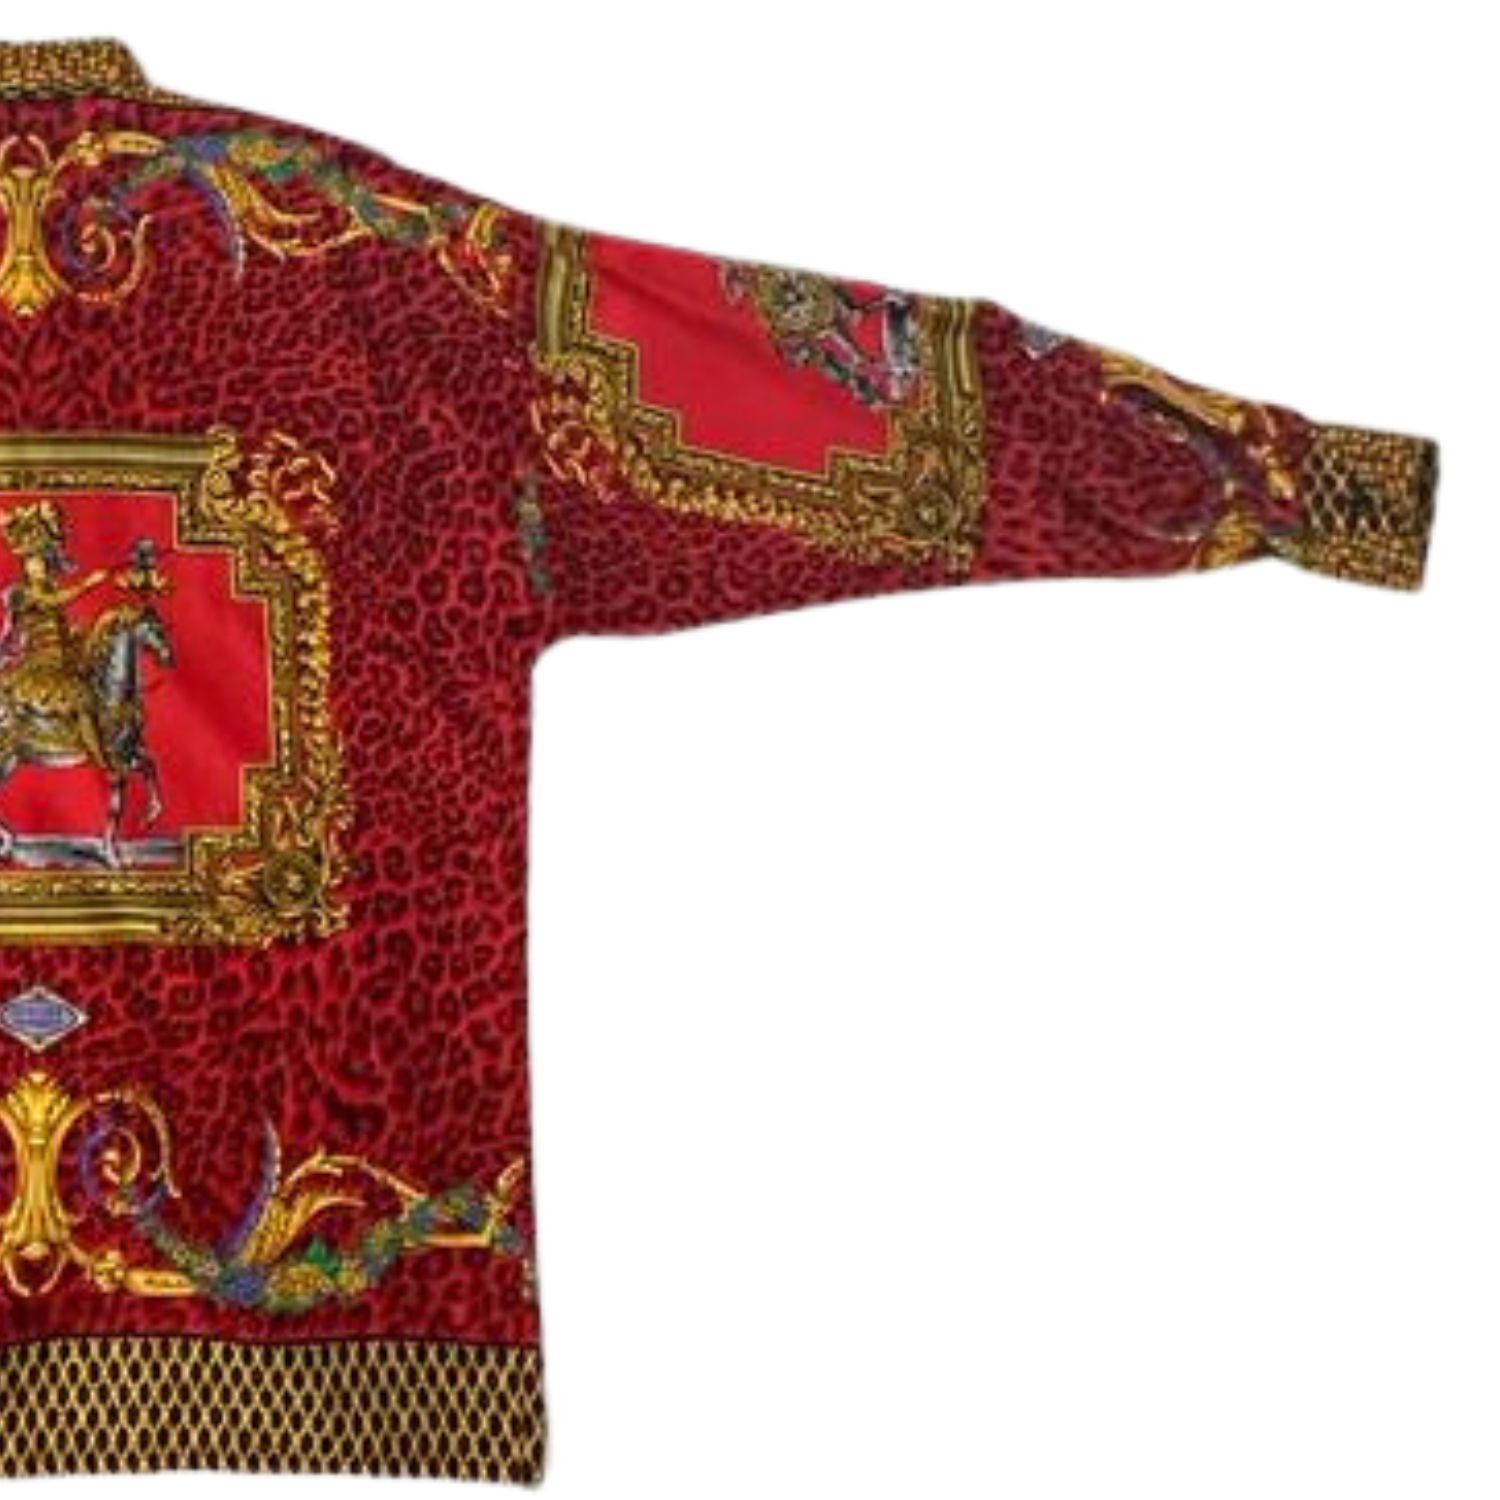 1990s Gianni Versace Red & Gold Silk Twill Baroque Leopard Shirt For Sale 2